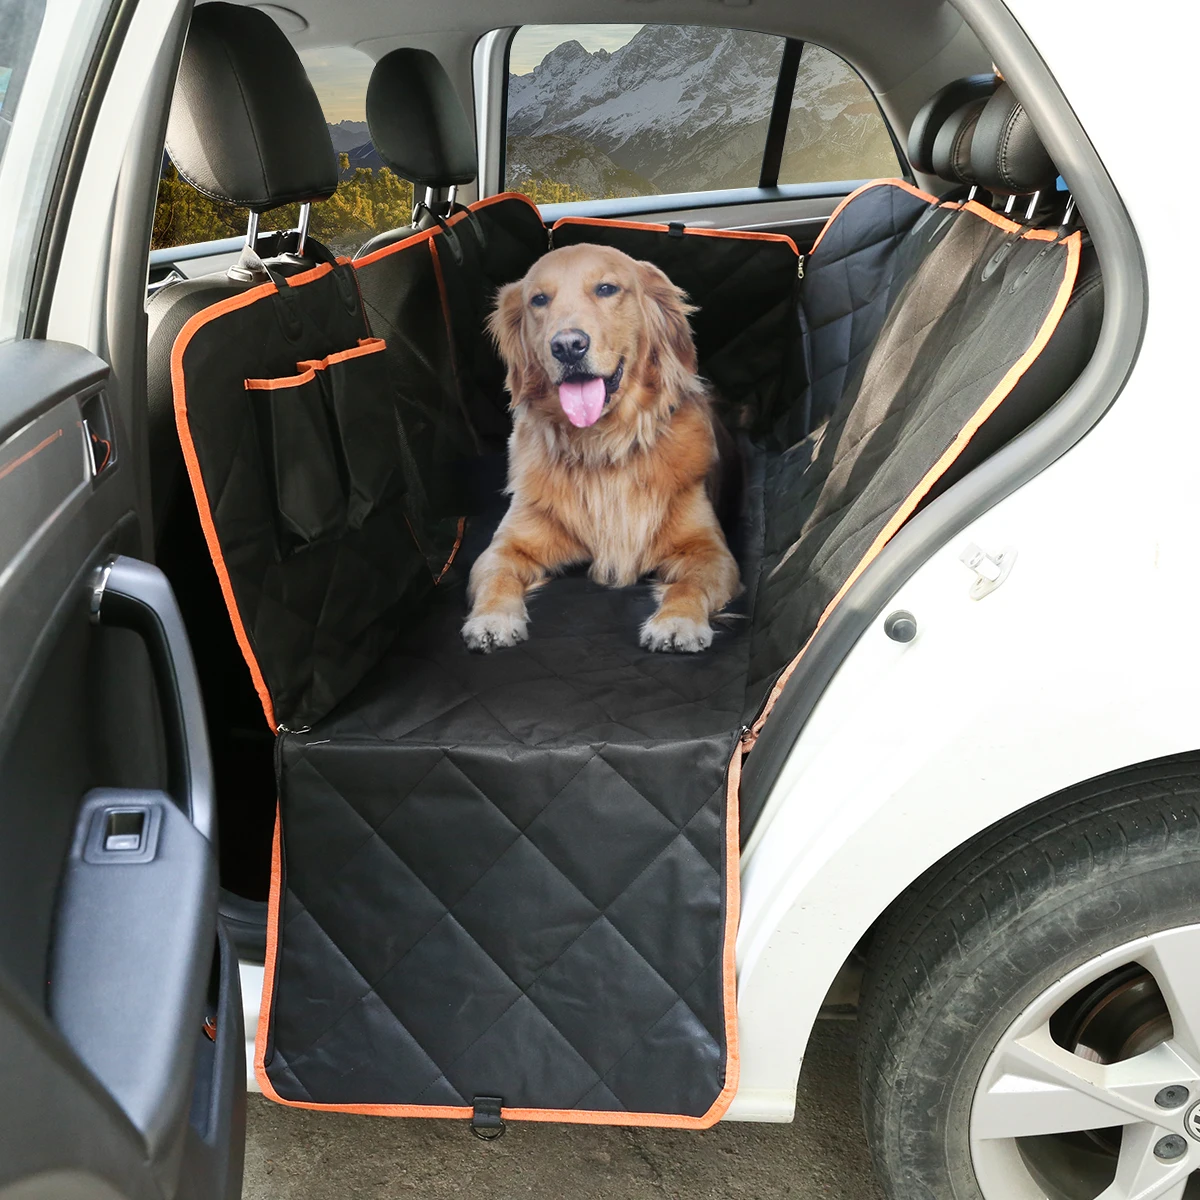 

Waterproof Quilted Non-slip Pet Dog Car Seat Cover Hammock Pet Accessories Mat Blanket Back Seat Protector Mesh Viewing Window